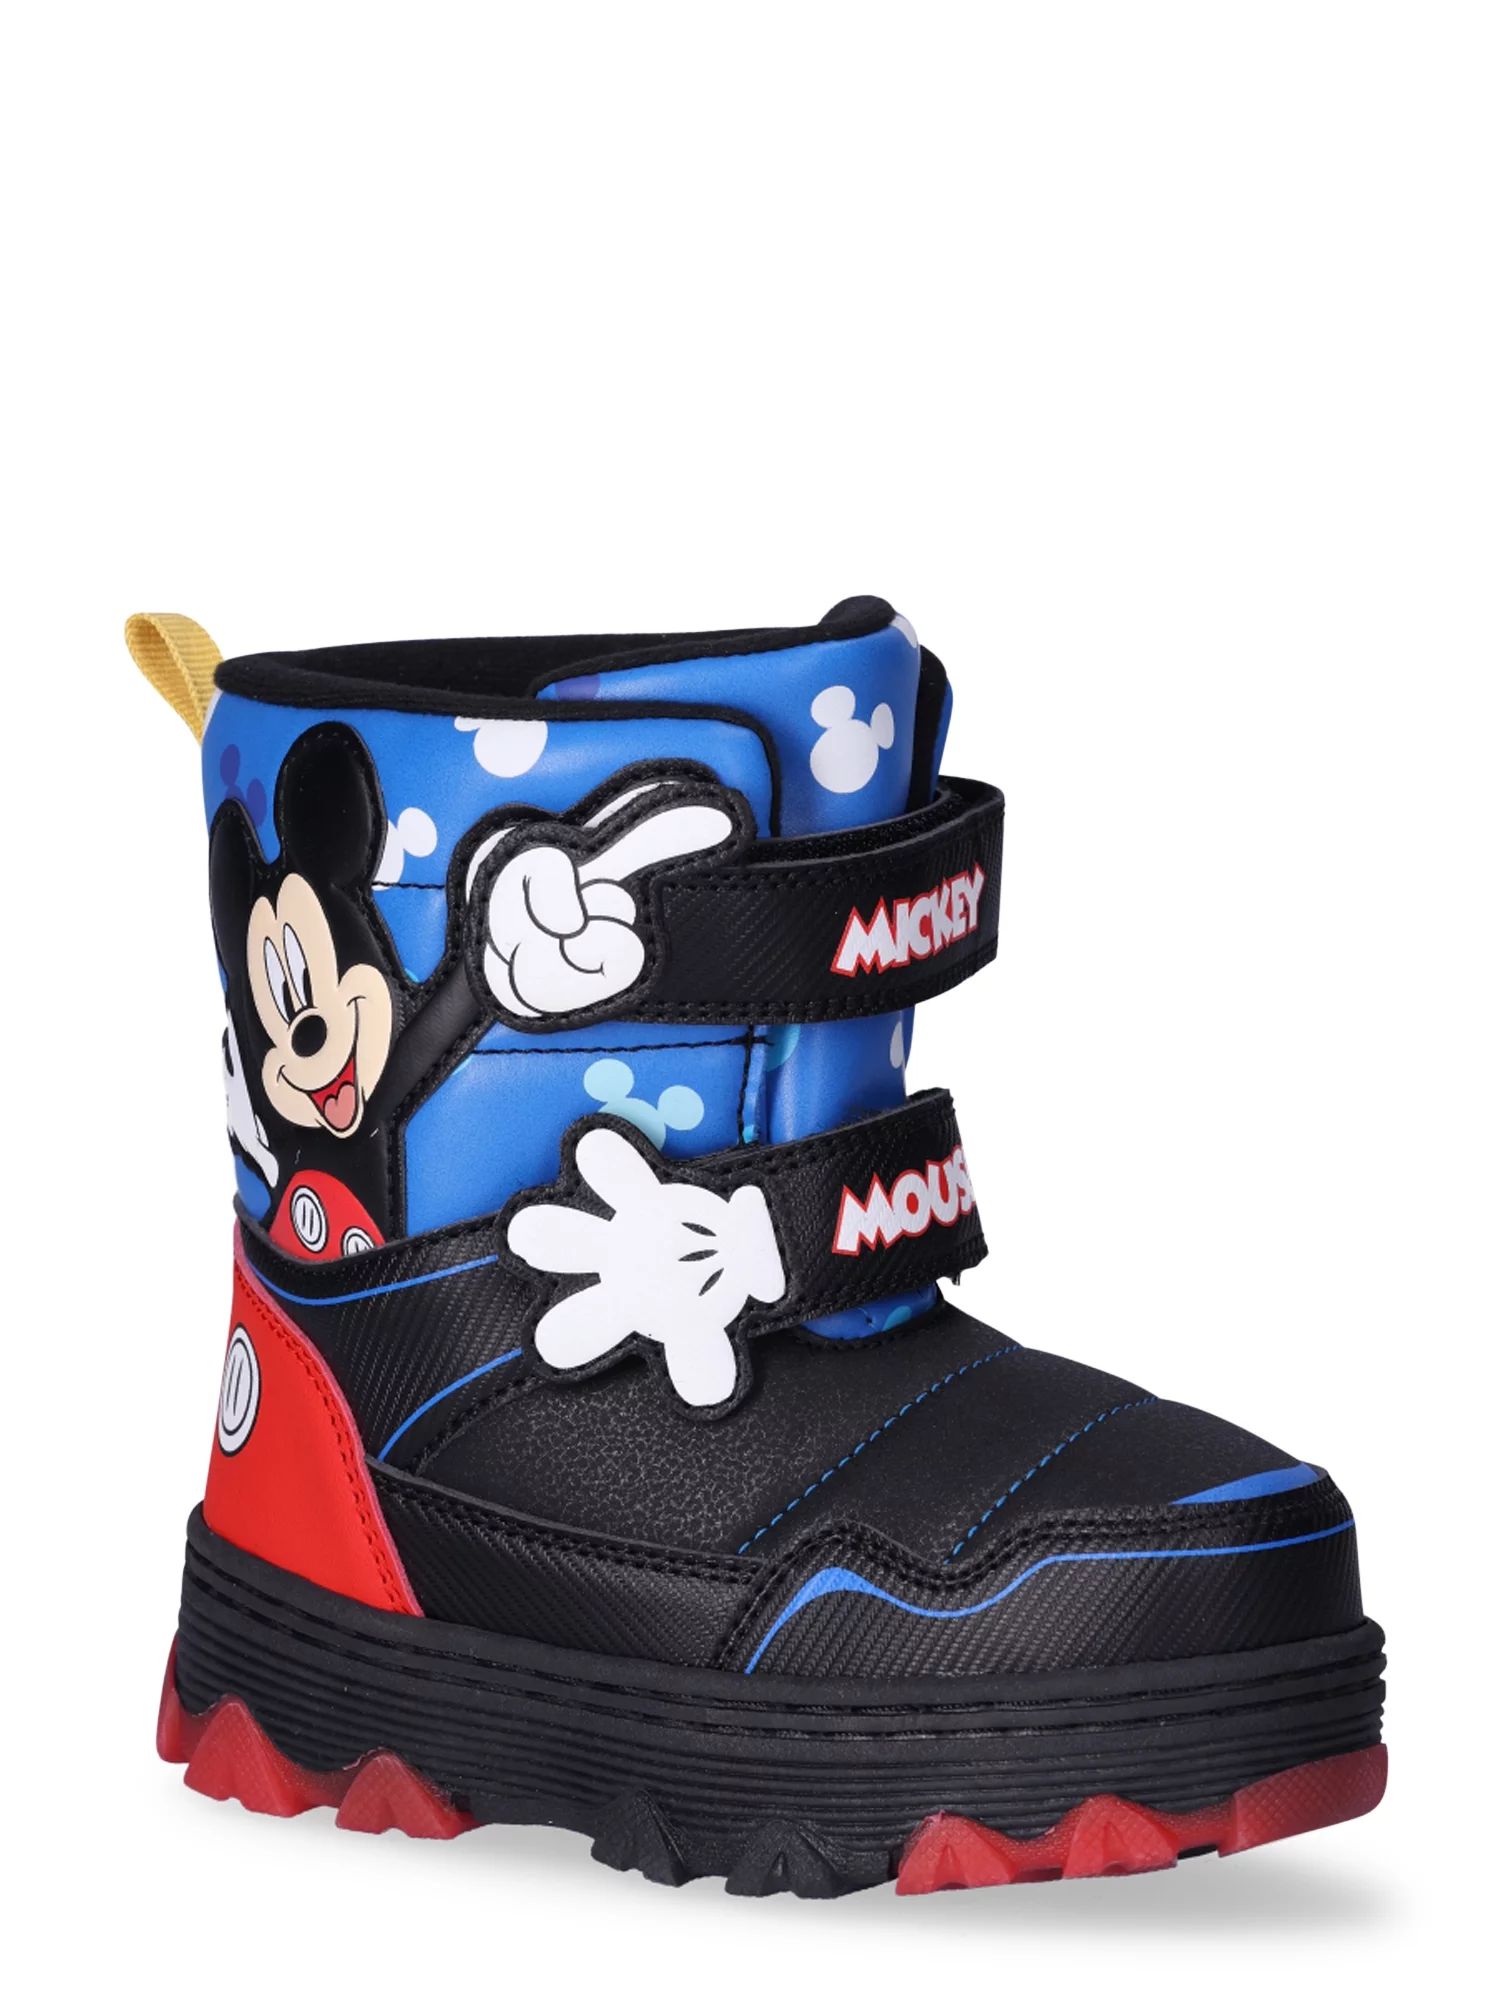 Mickey Mouse Toddler Boy Light Up Winter Snow Boots, Sizes 7-12 | Walmart (US)